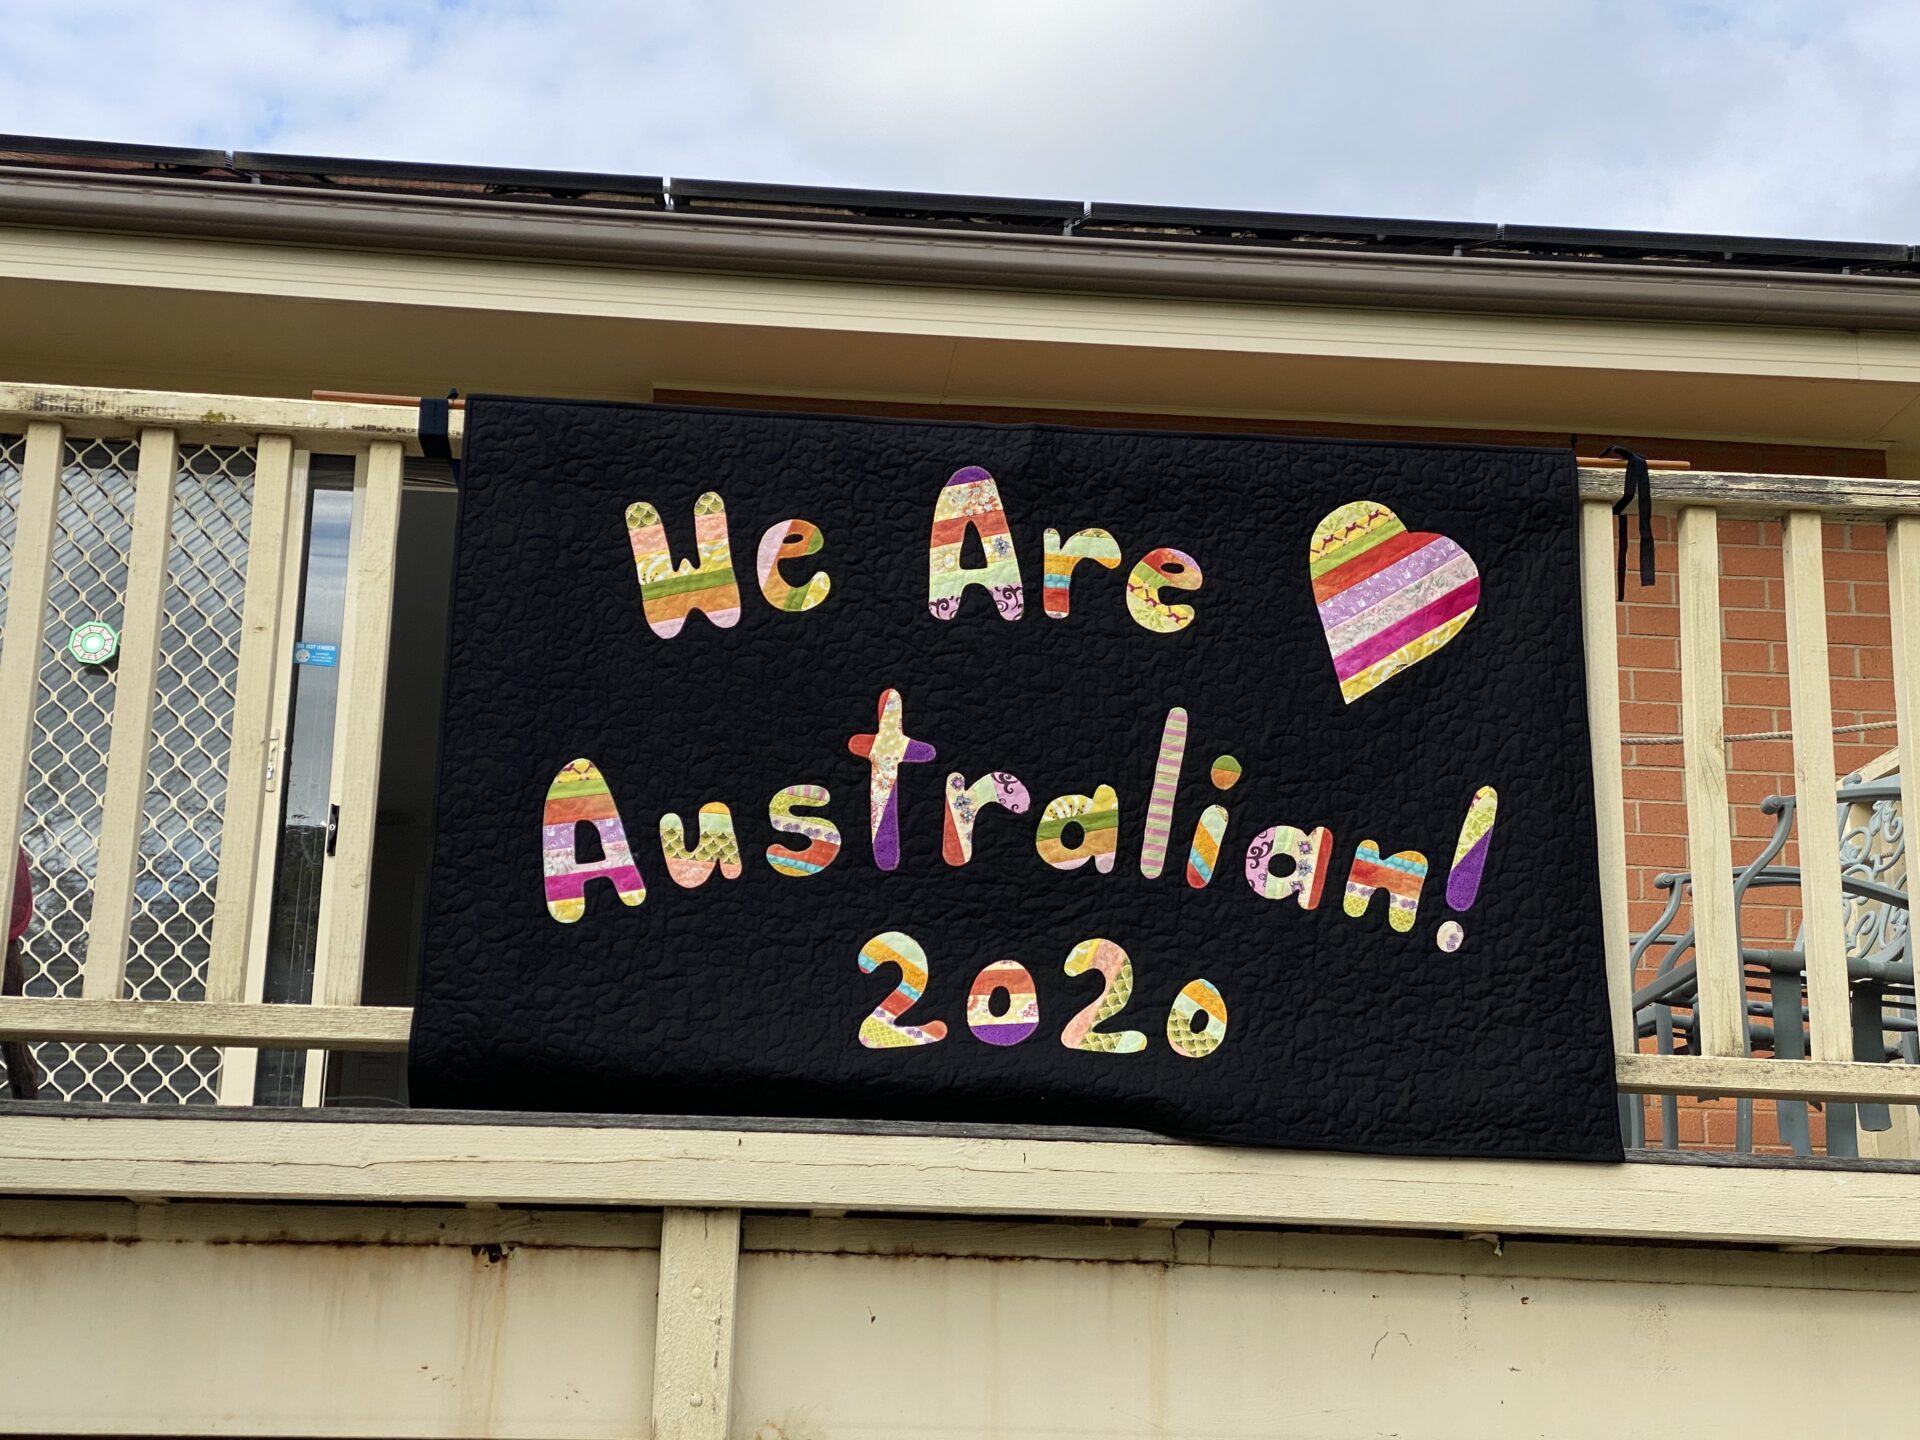 a handmade quilt with the words 'we are Australian 2020' stitched on it. The quilt is suspended from the side of a veranda balcony.